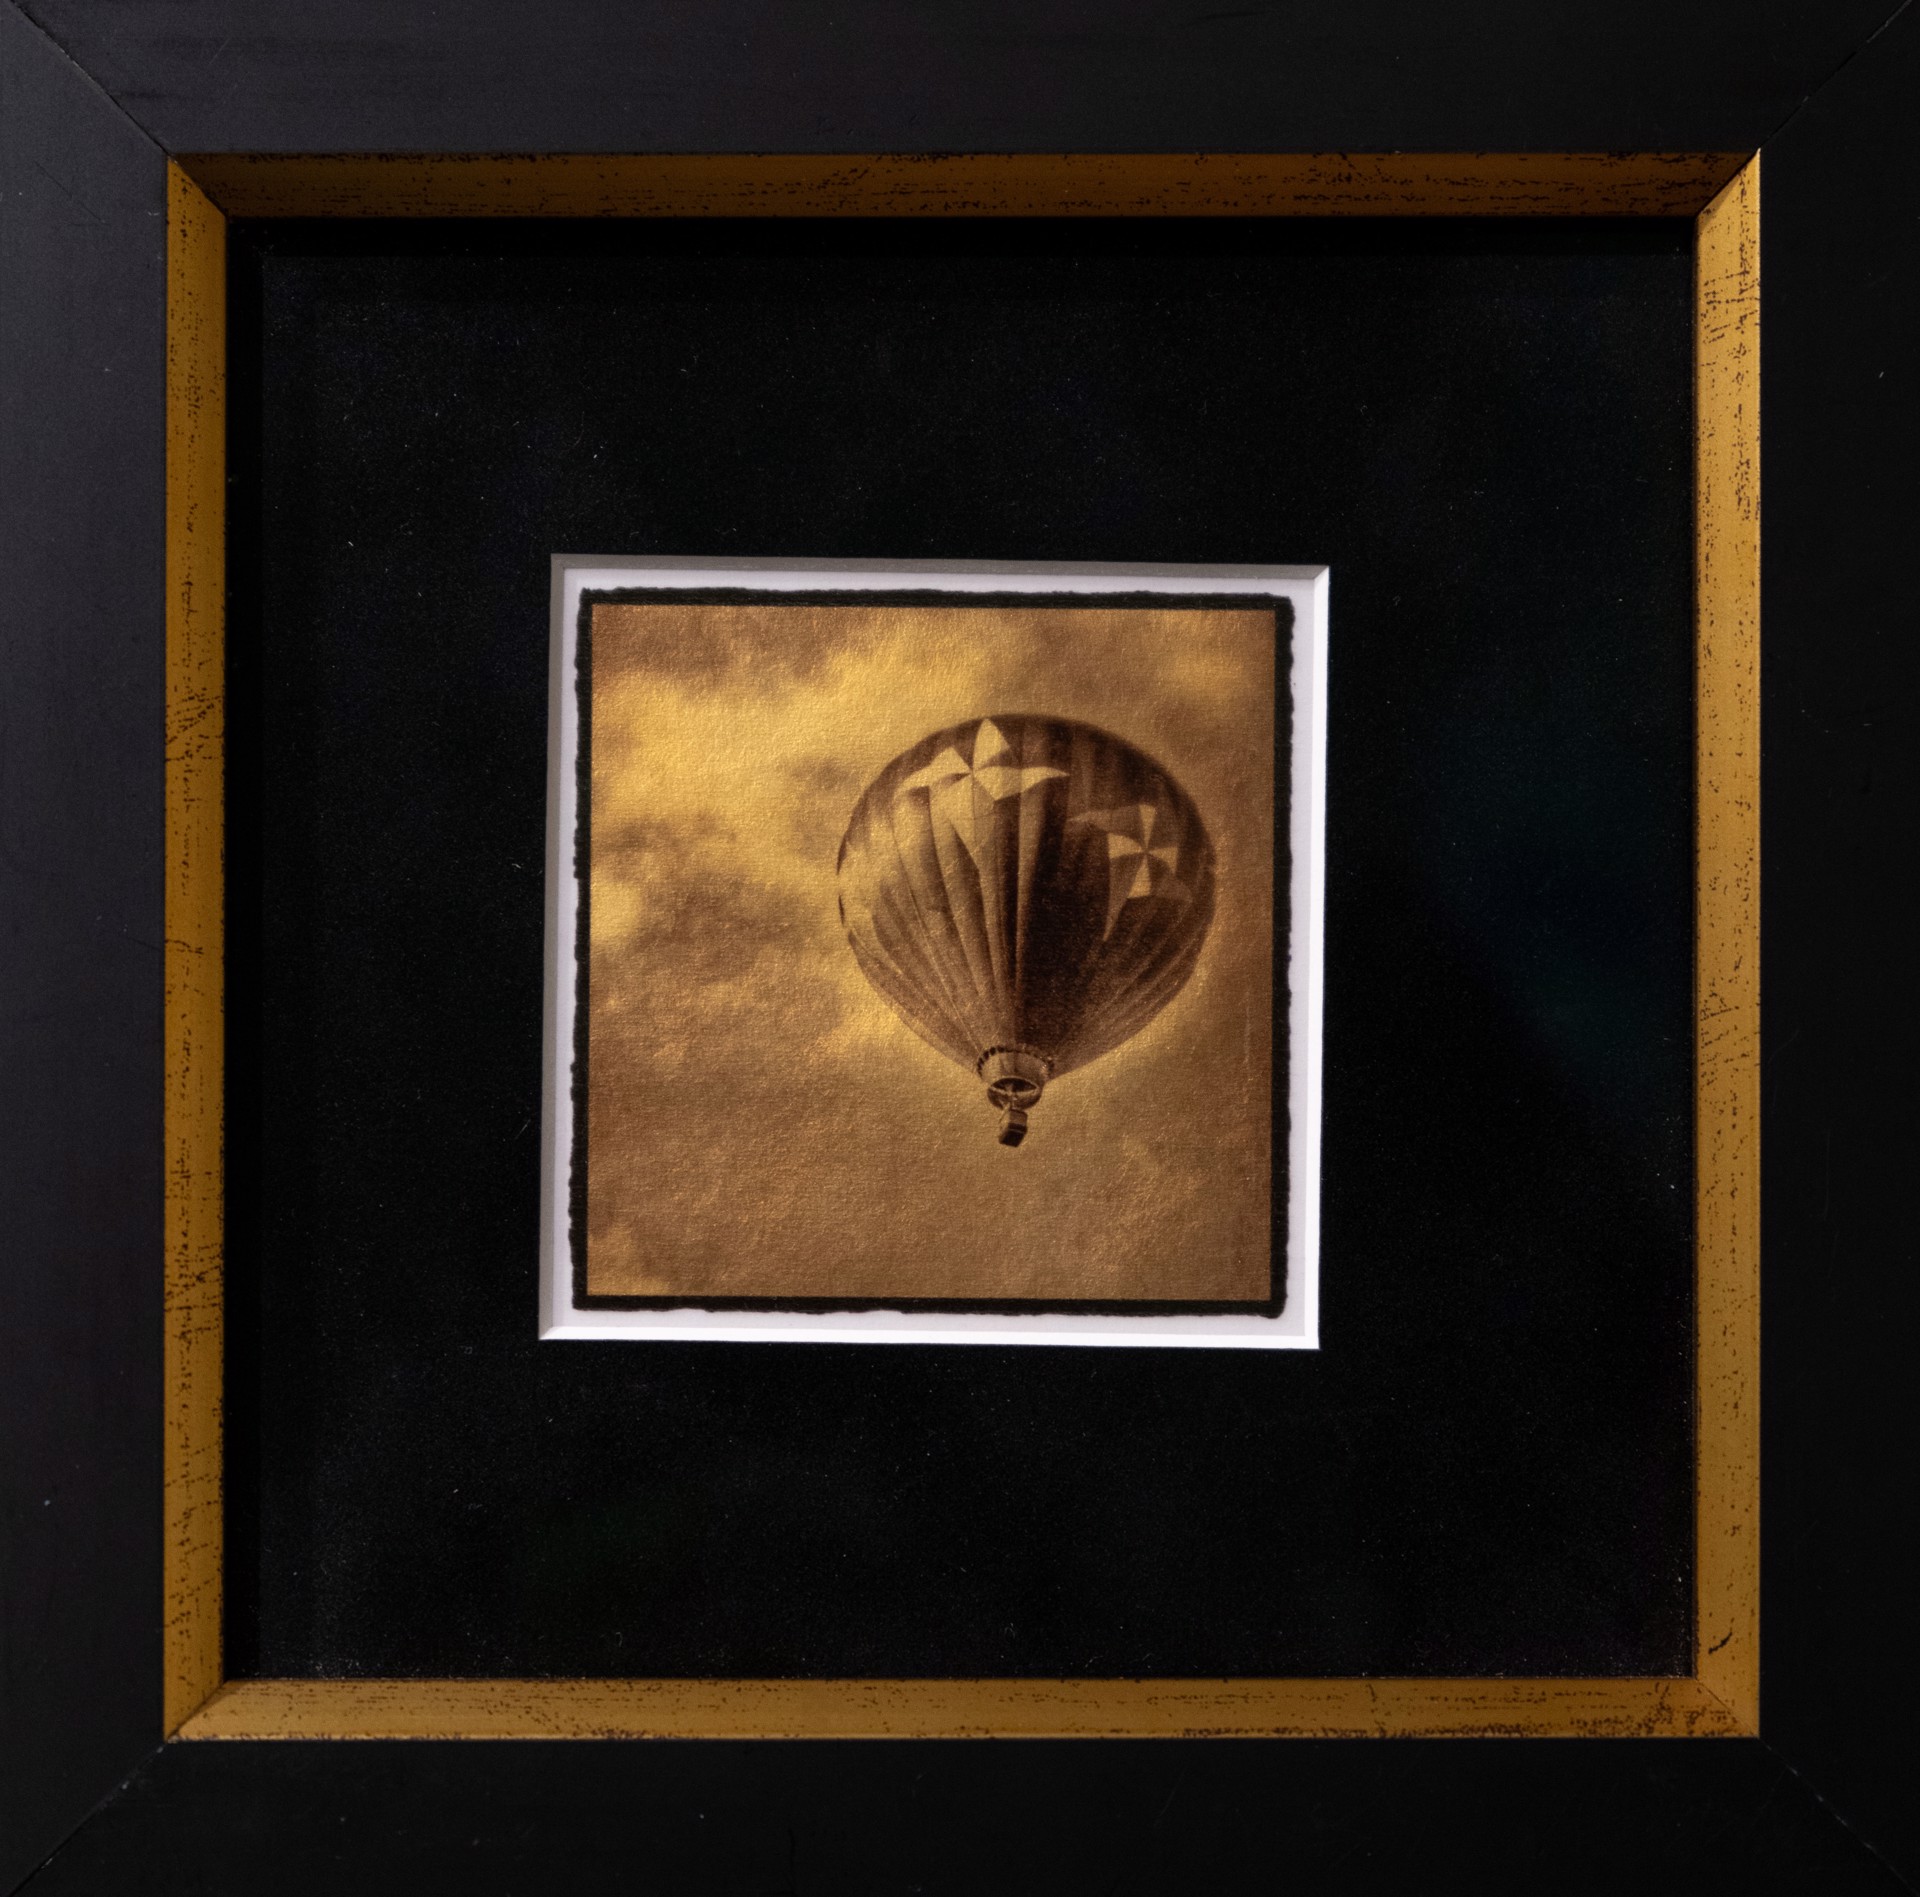 Hot Air Balloon by Catherine Day